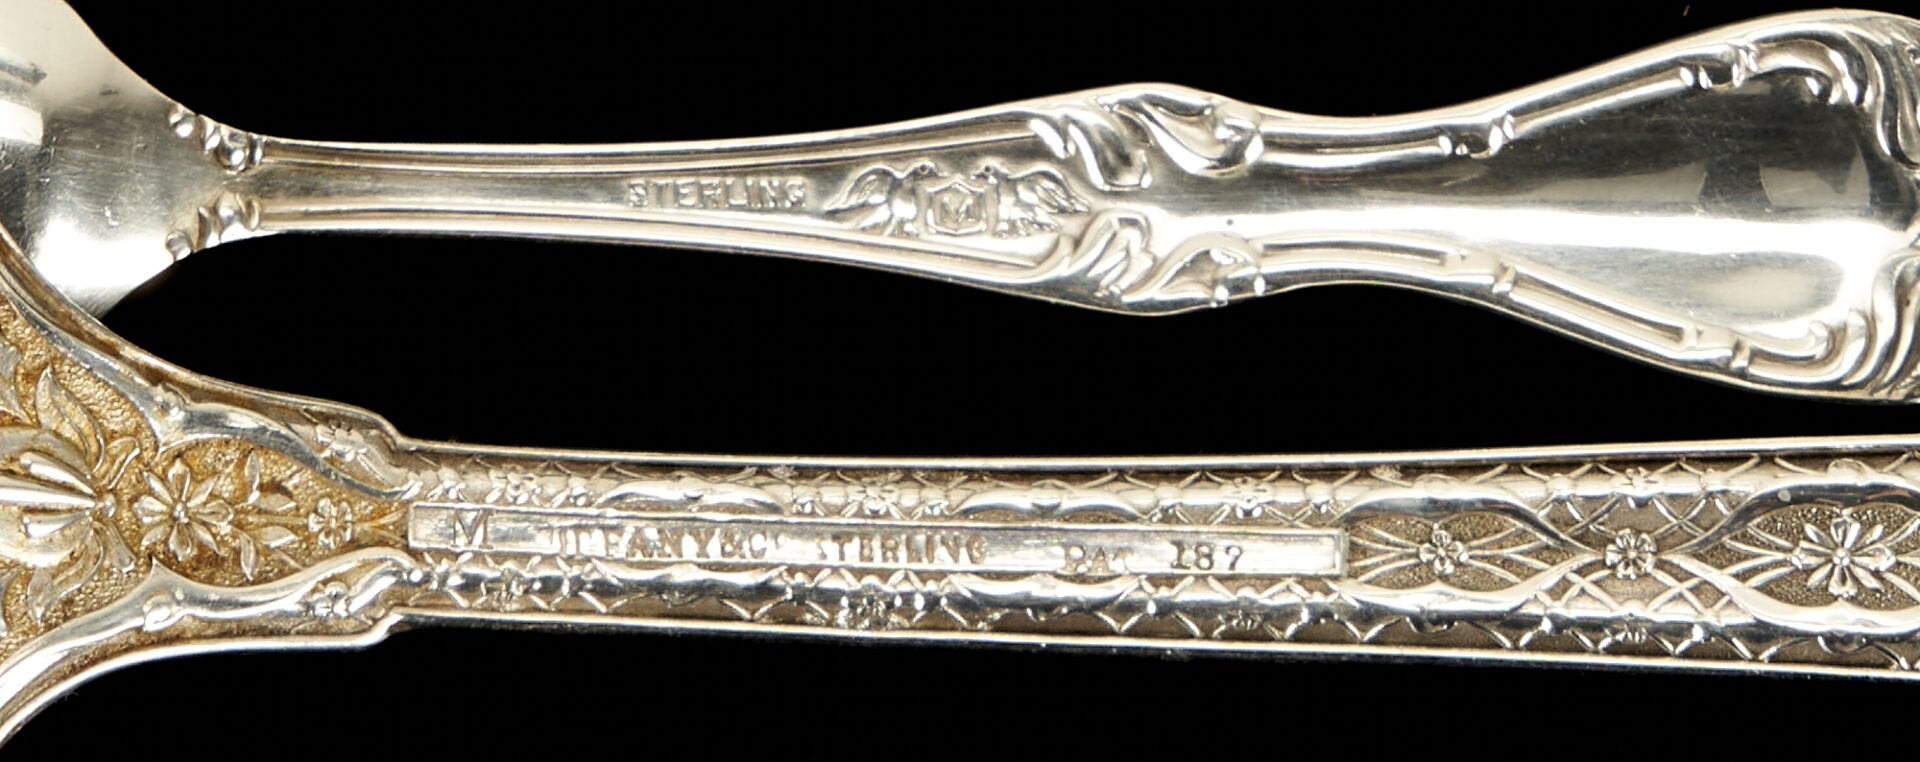 Lot 1093: 15 Sterling Silver Flatware or Serving Items, incl. Tiffany